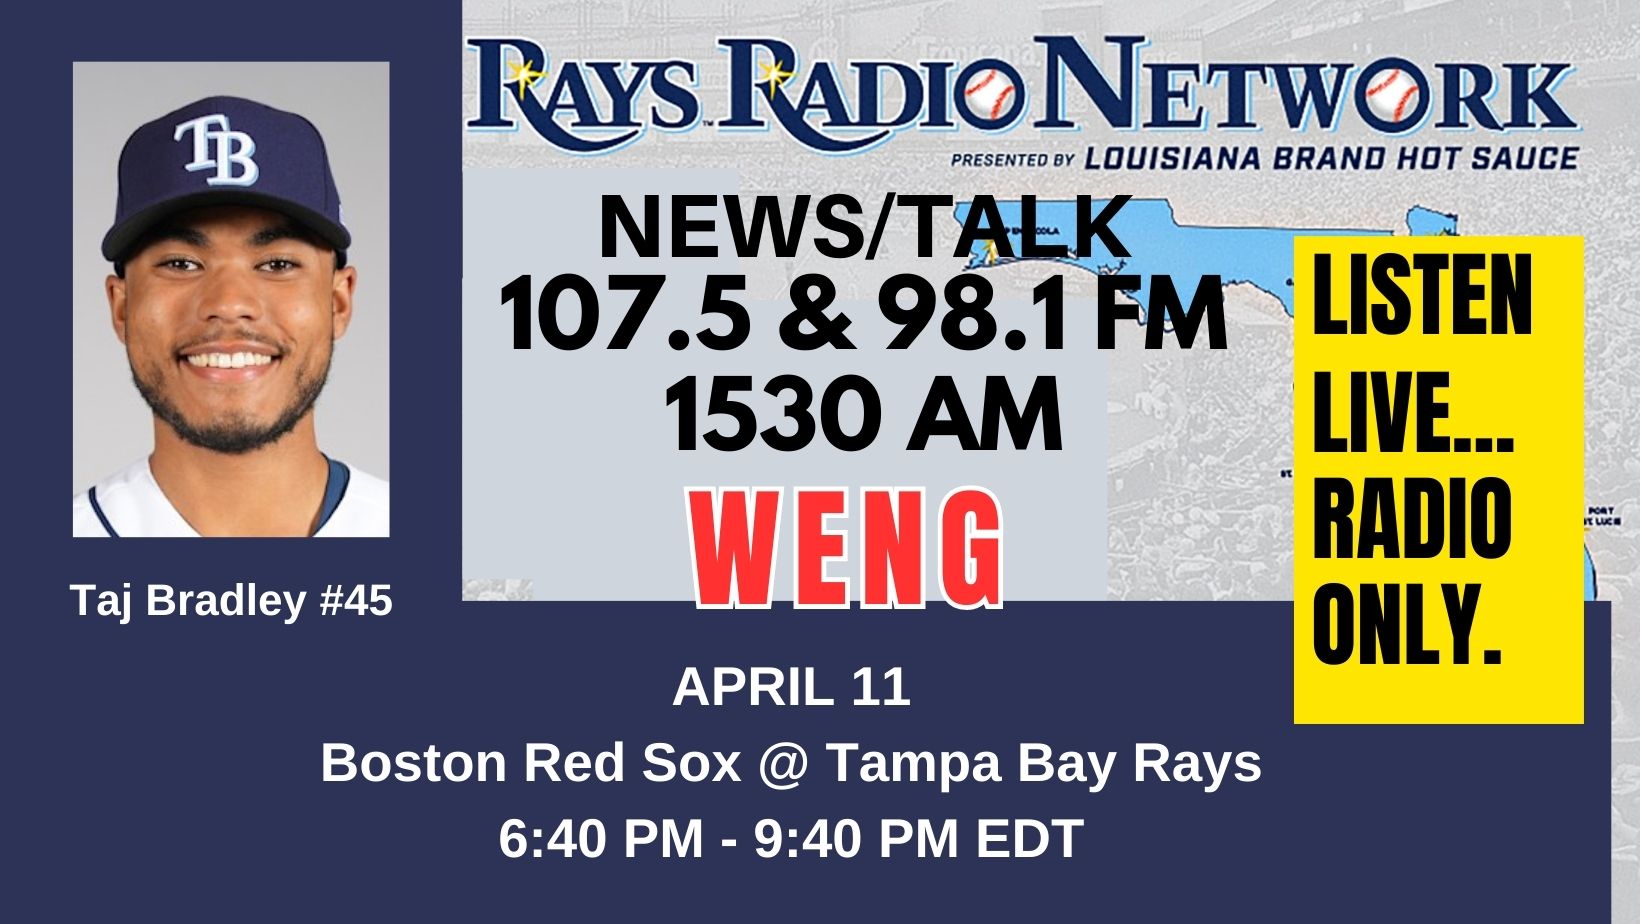 Boston Red Sox Tampa Bay Rays 640 PM LISTEN LIVE ON WENG RADIO WENG 98.1FM, 107.5 FM and 1530 AM